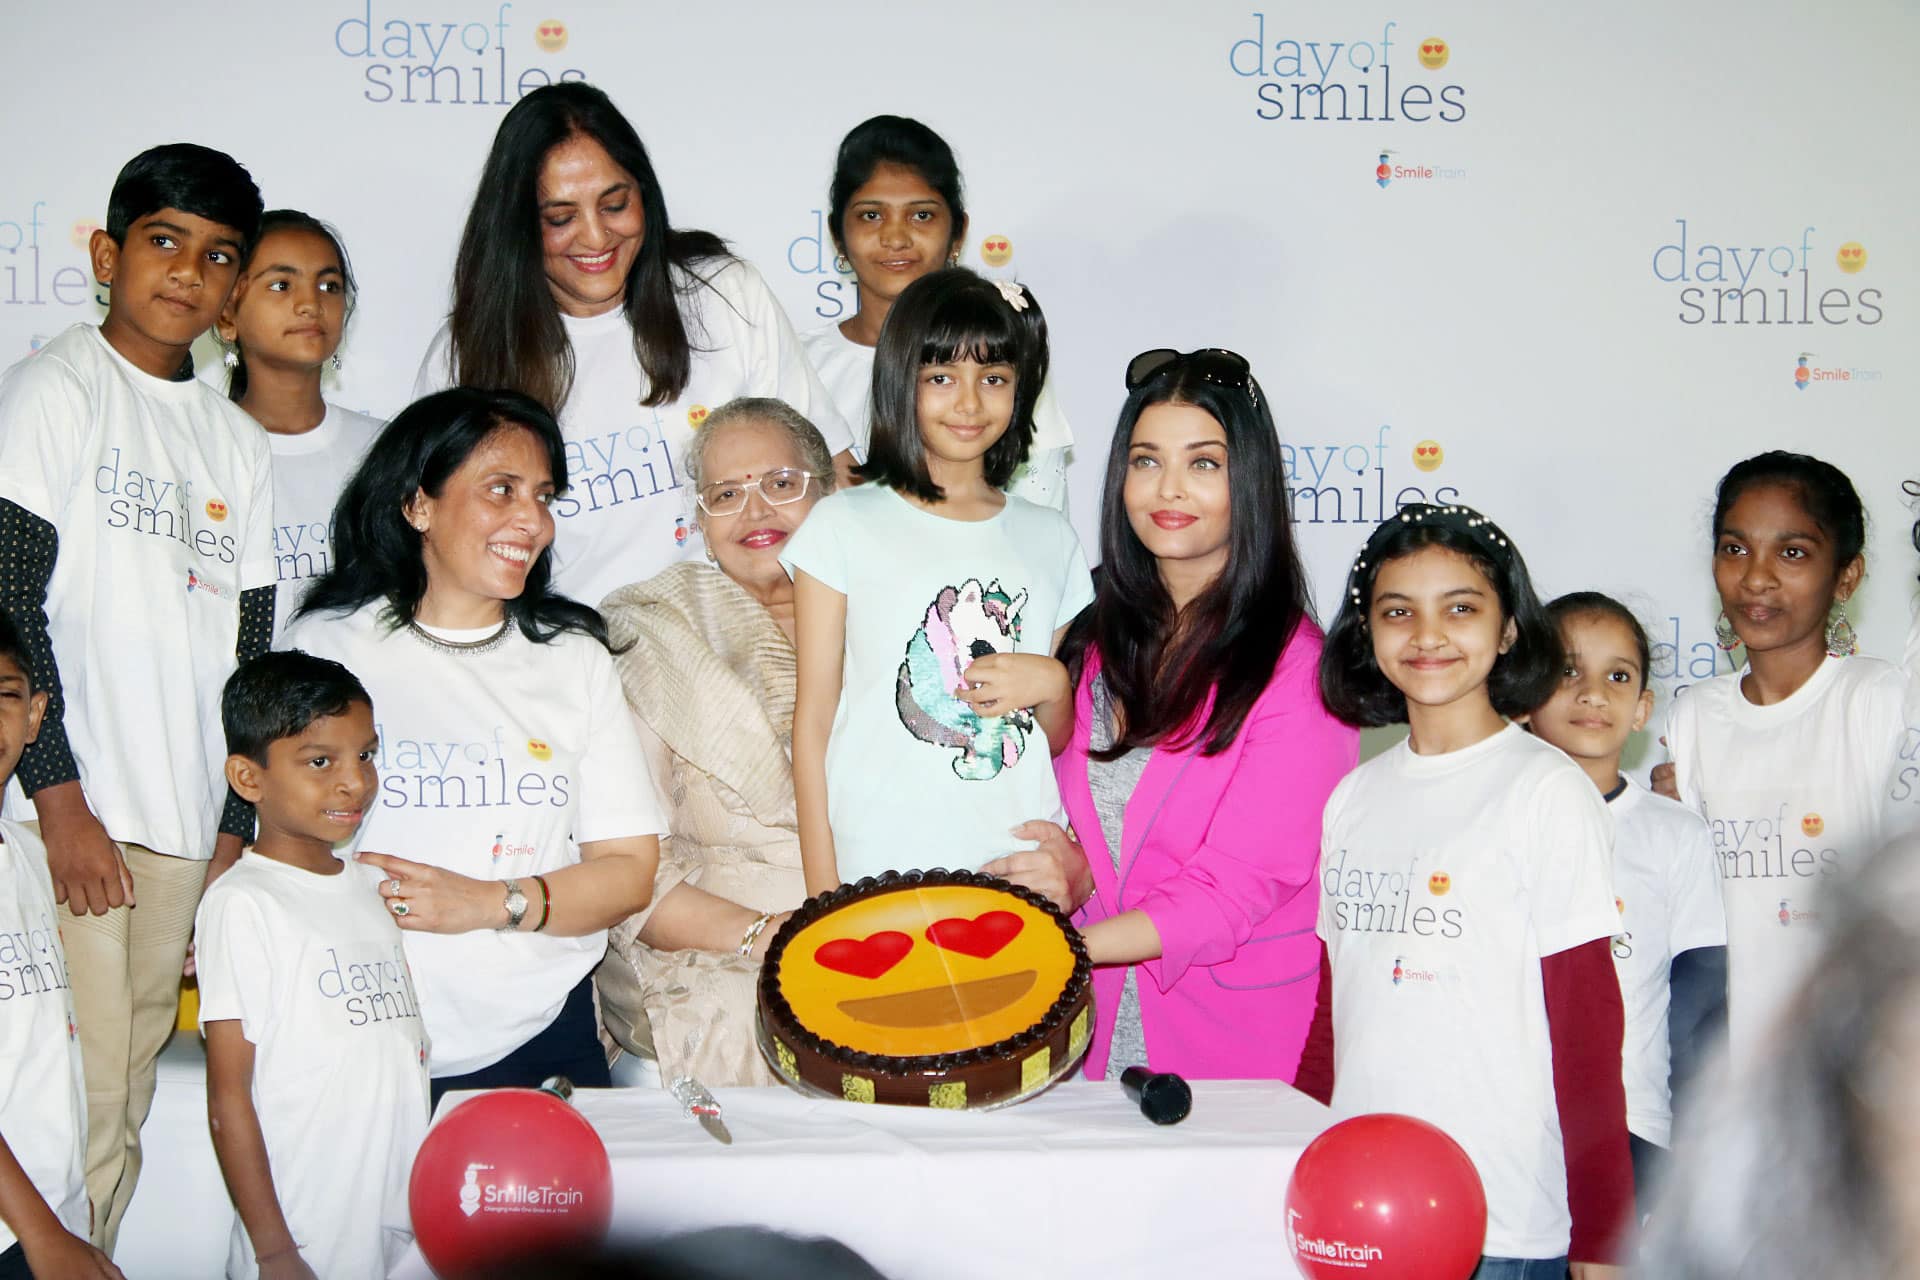 Ash, mom Vrinda and Aaradhya at an event